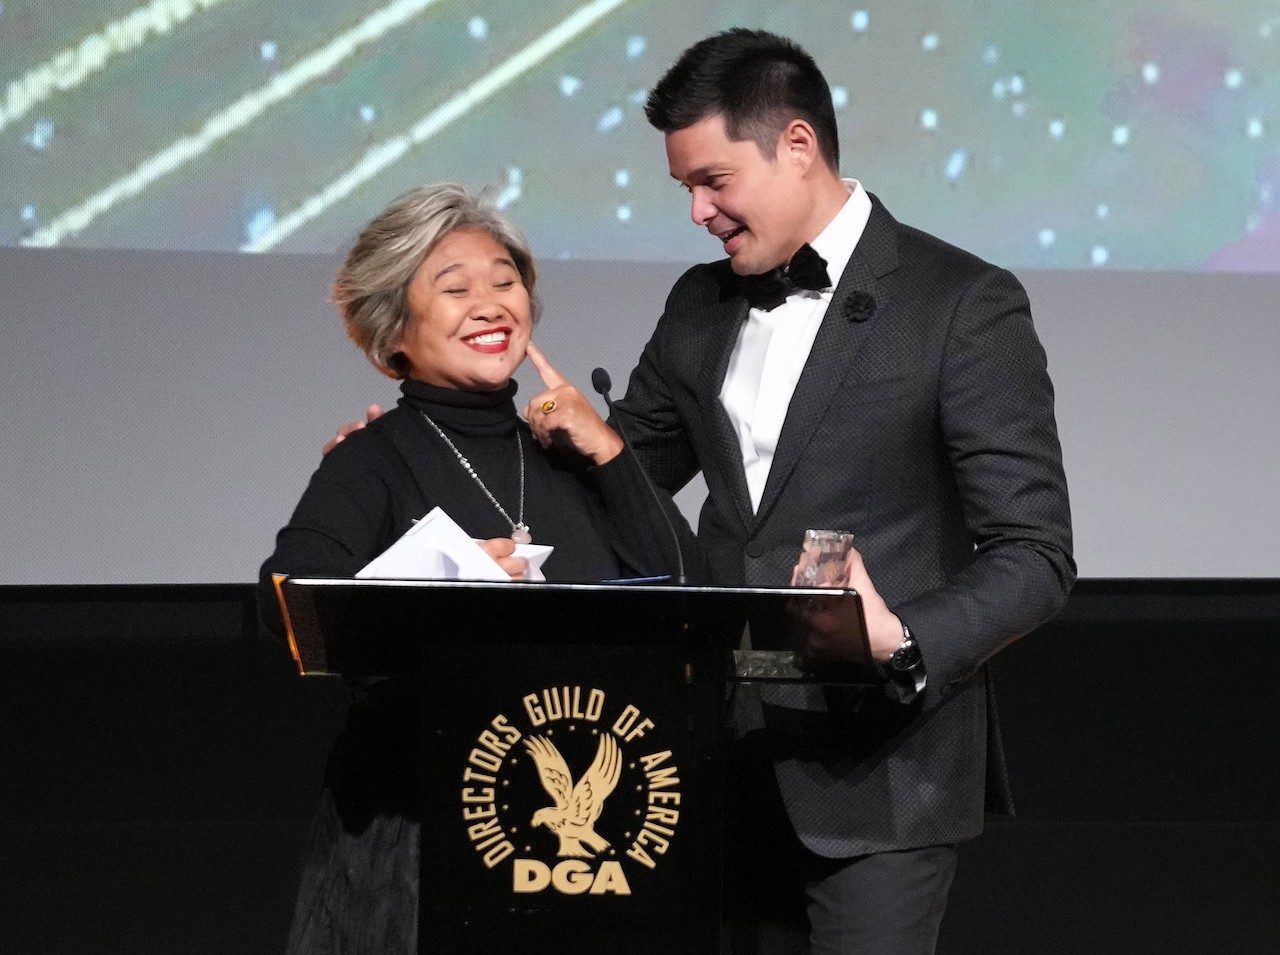 [Only IN Hollywood] Eugene Domingo steals show at Manila International Film Festival